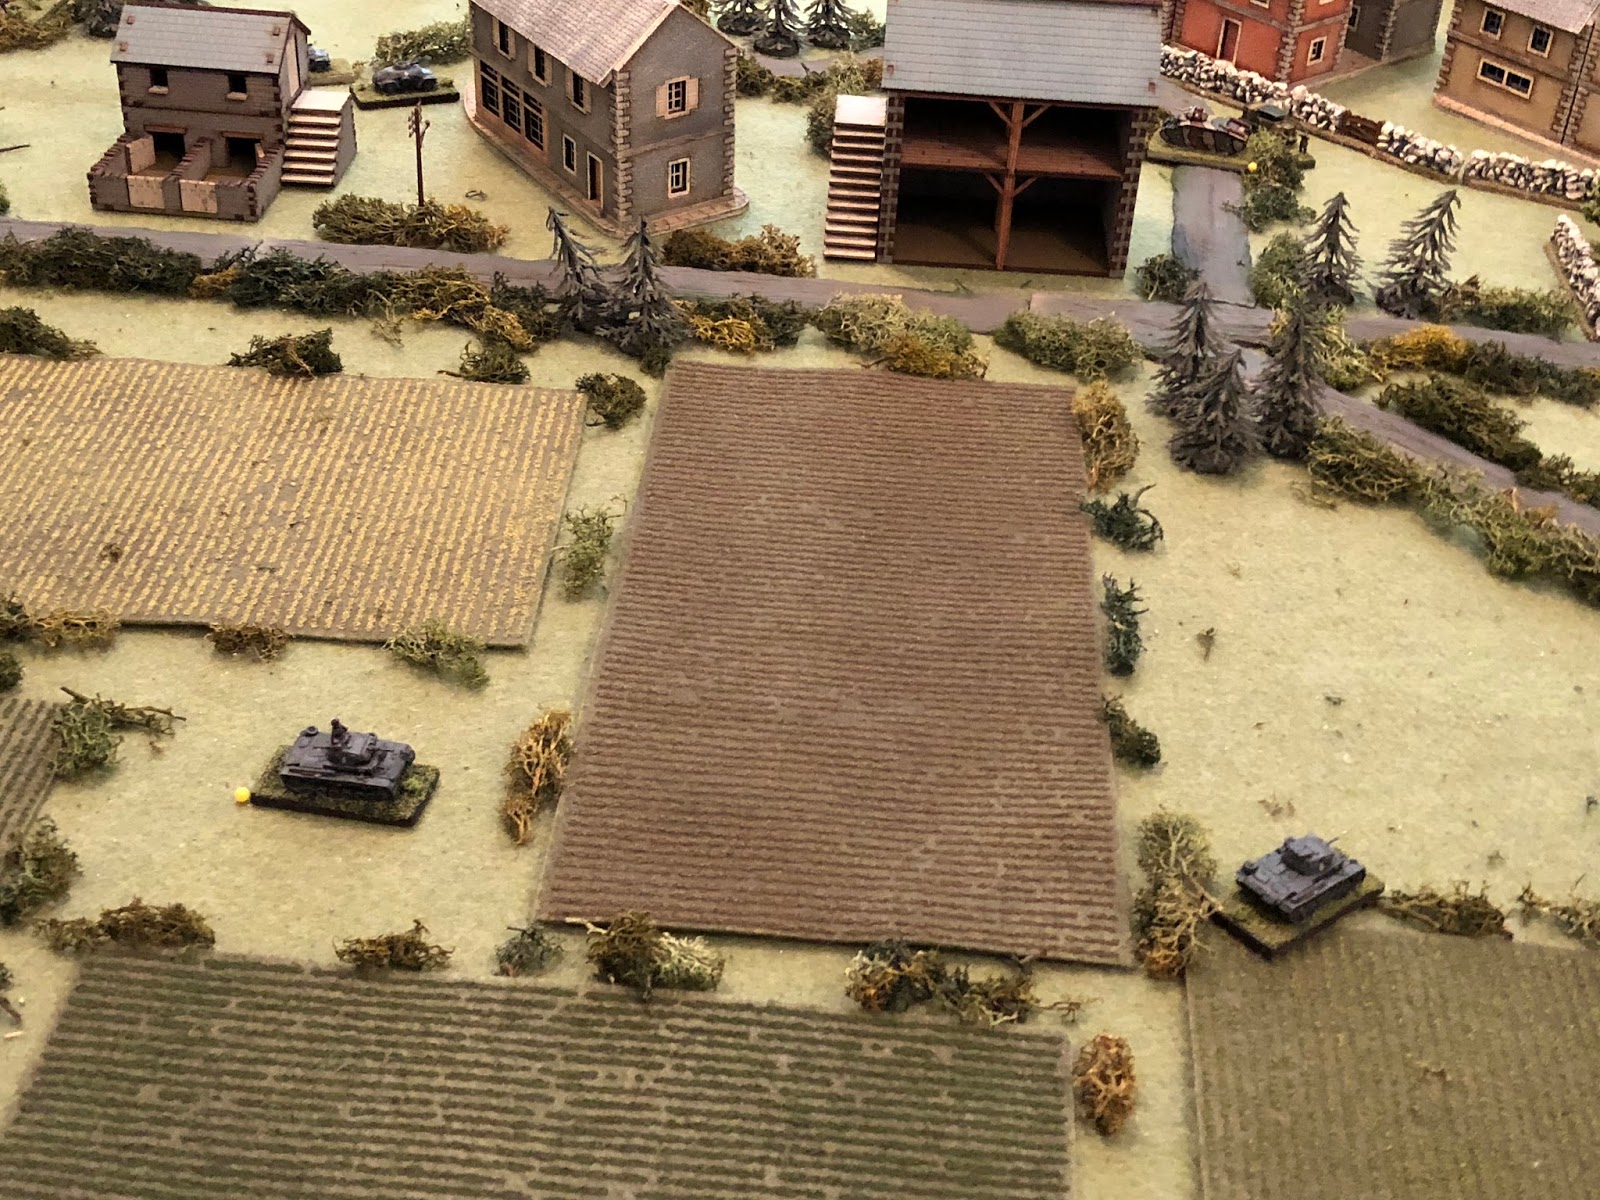  Sgt Mayer thinks he's going to get on the flank but his tank bottoms out in a rut in the field (bottom right), significantly slowing it down, while Lt Loeb's driver (left) appears to be having problems manipulating the transmission, as they don't mo